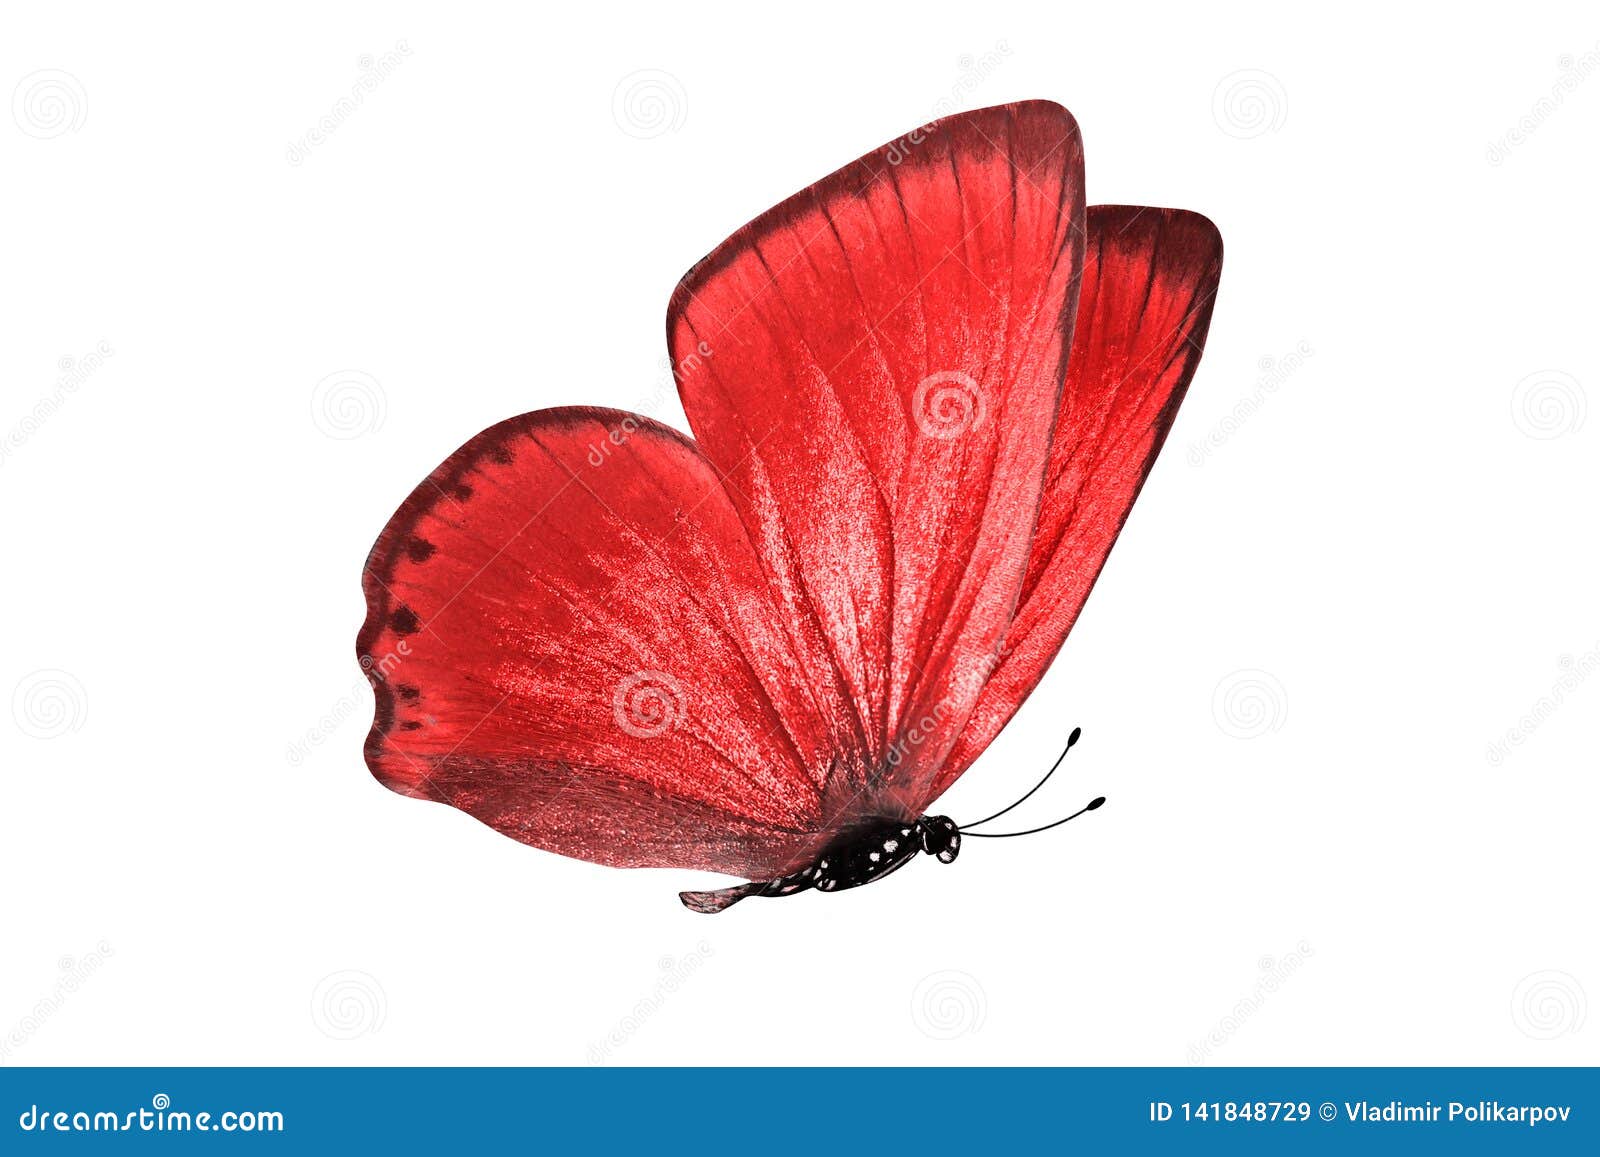 Red Fake Butterfly Isolated Stock Image - Image of pile, butterflies:  79551049